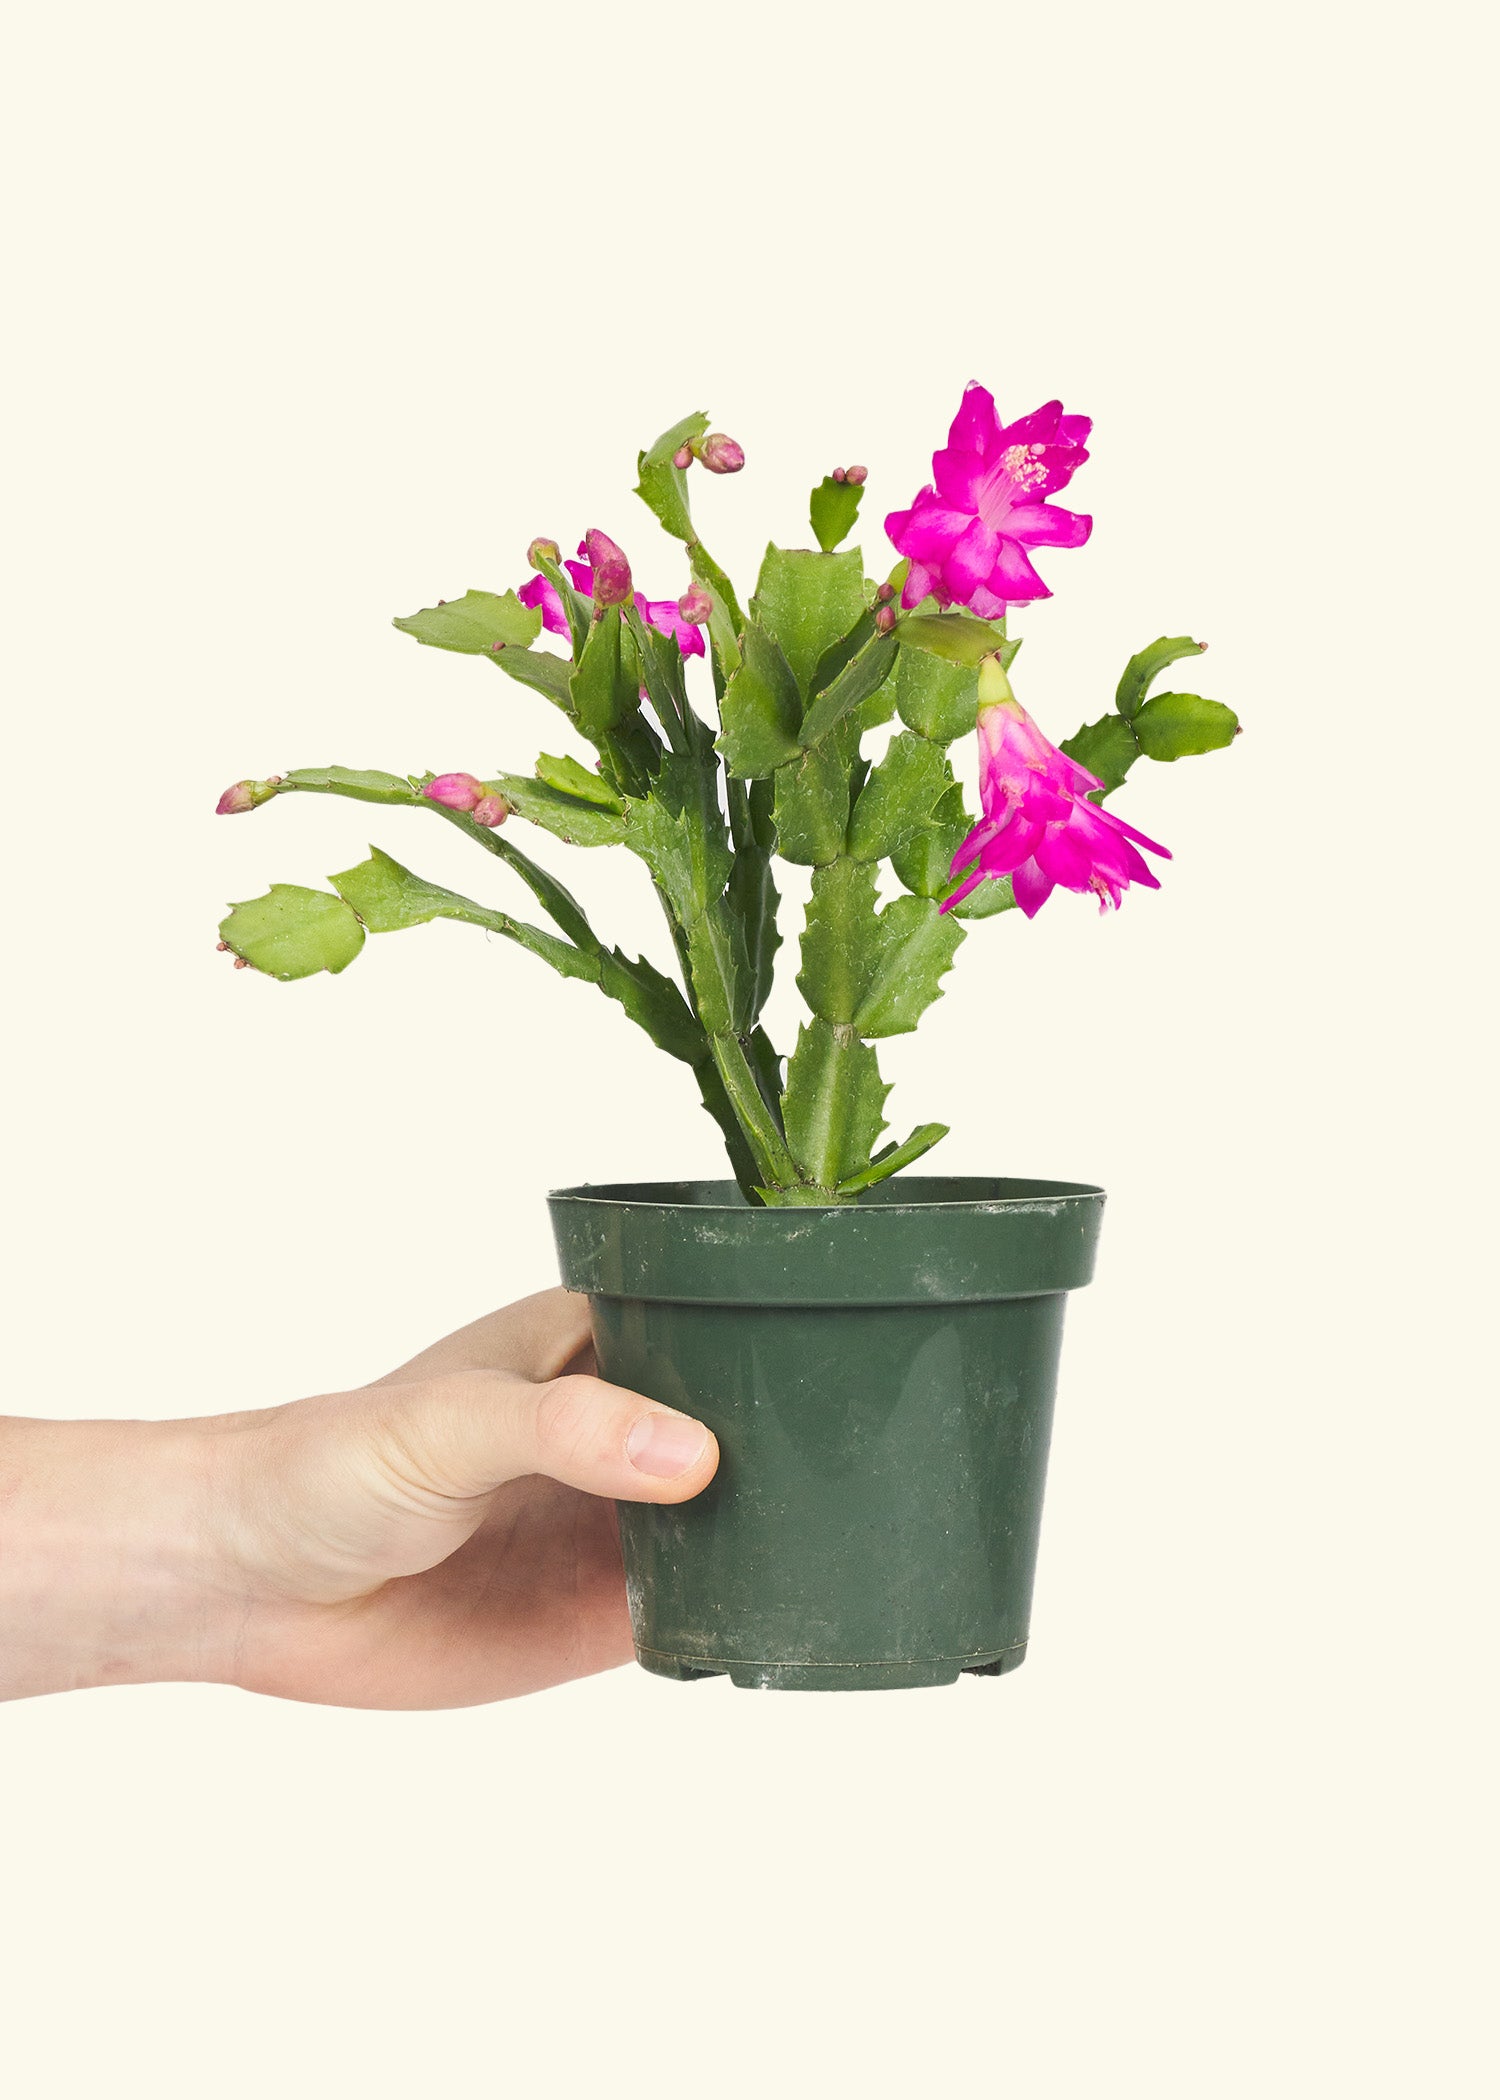 Small Pink Christmas Cactus in a grow pot.